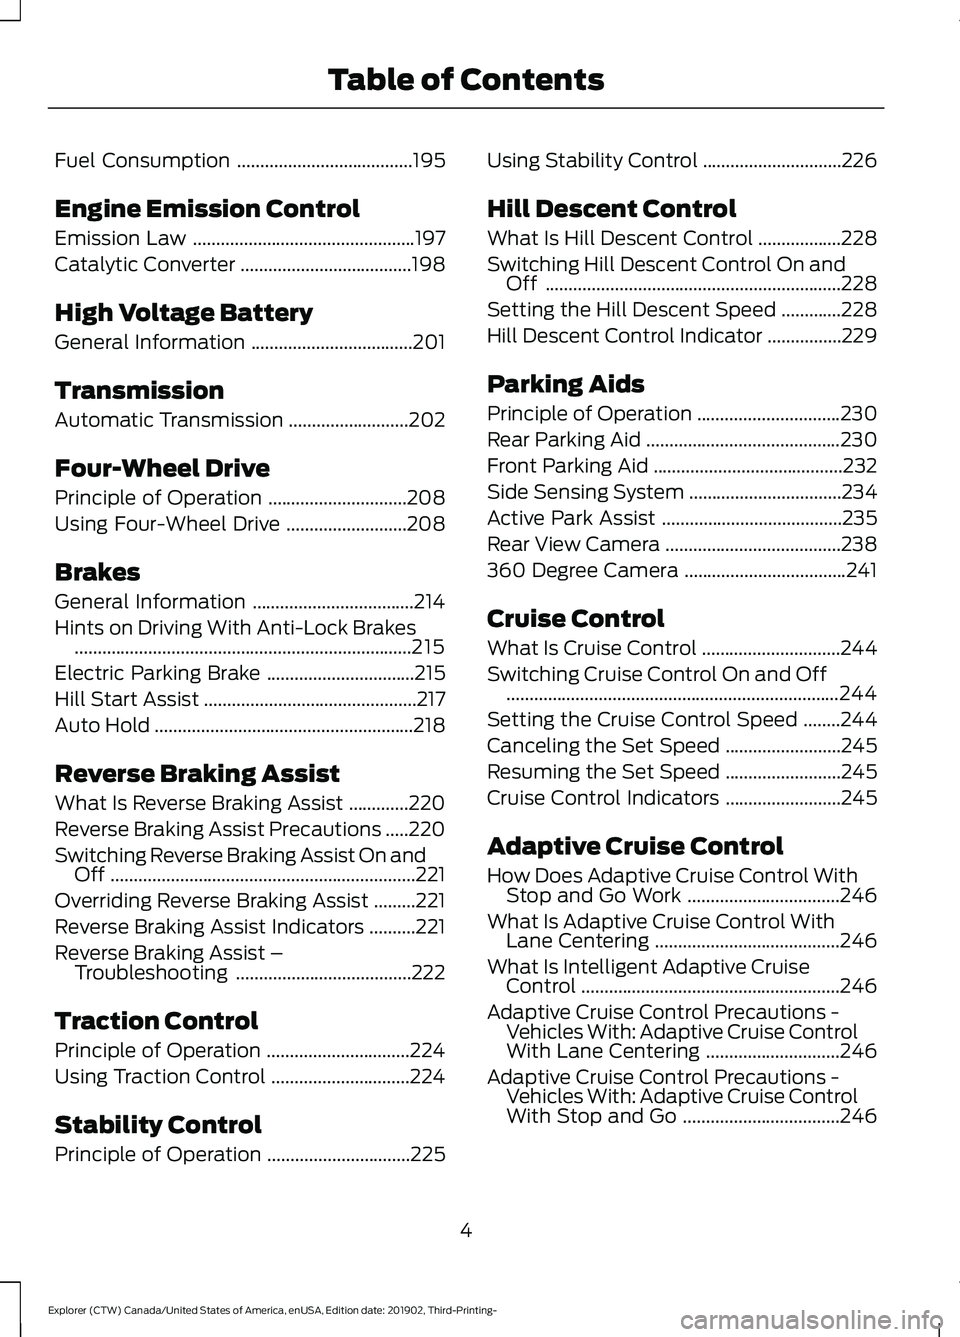 FORD EXPLORER 2020  Owners Manual Fuel Consumption
......................................195
Engine Emission Control
Emission Law ................................................
197
Catalytic Converter ...............................